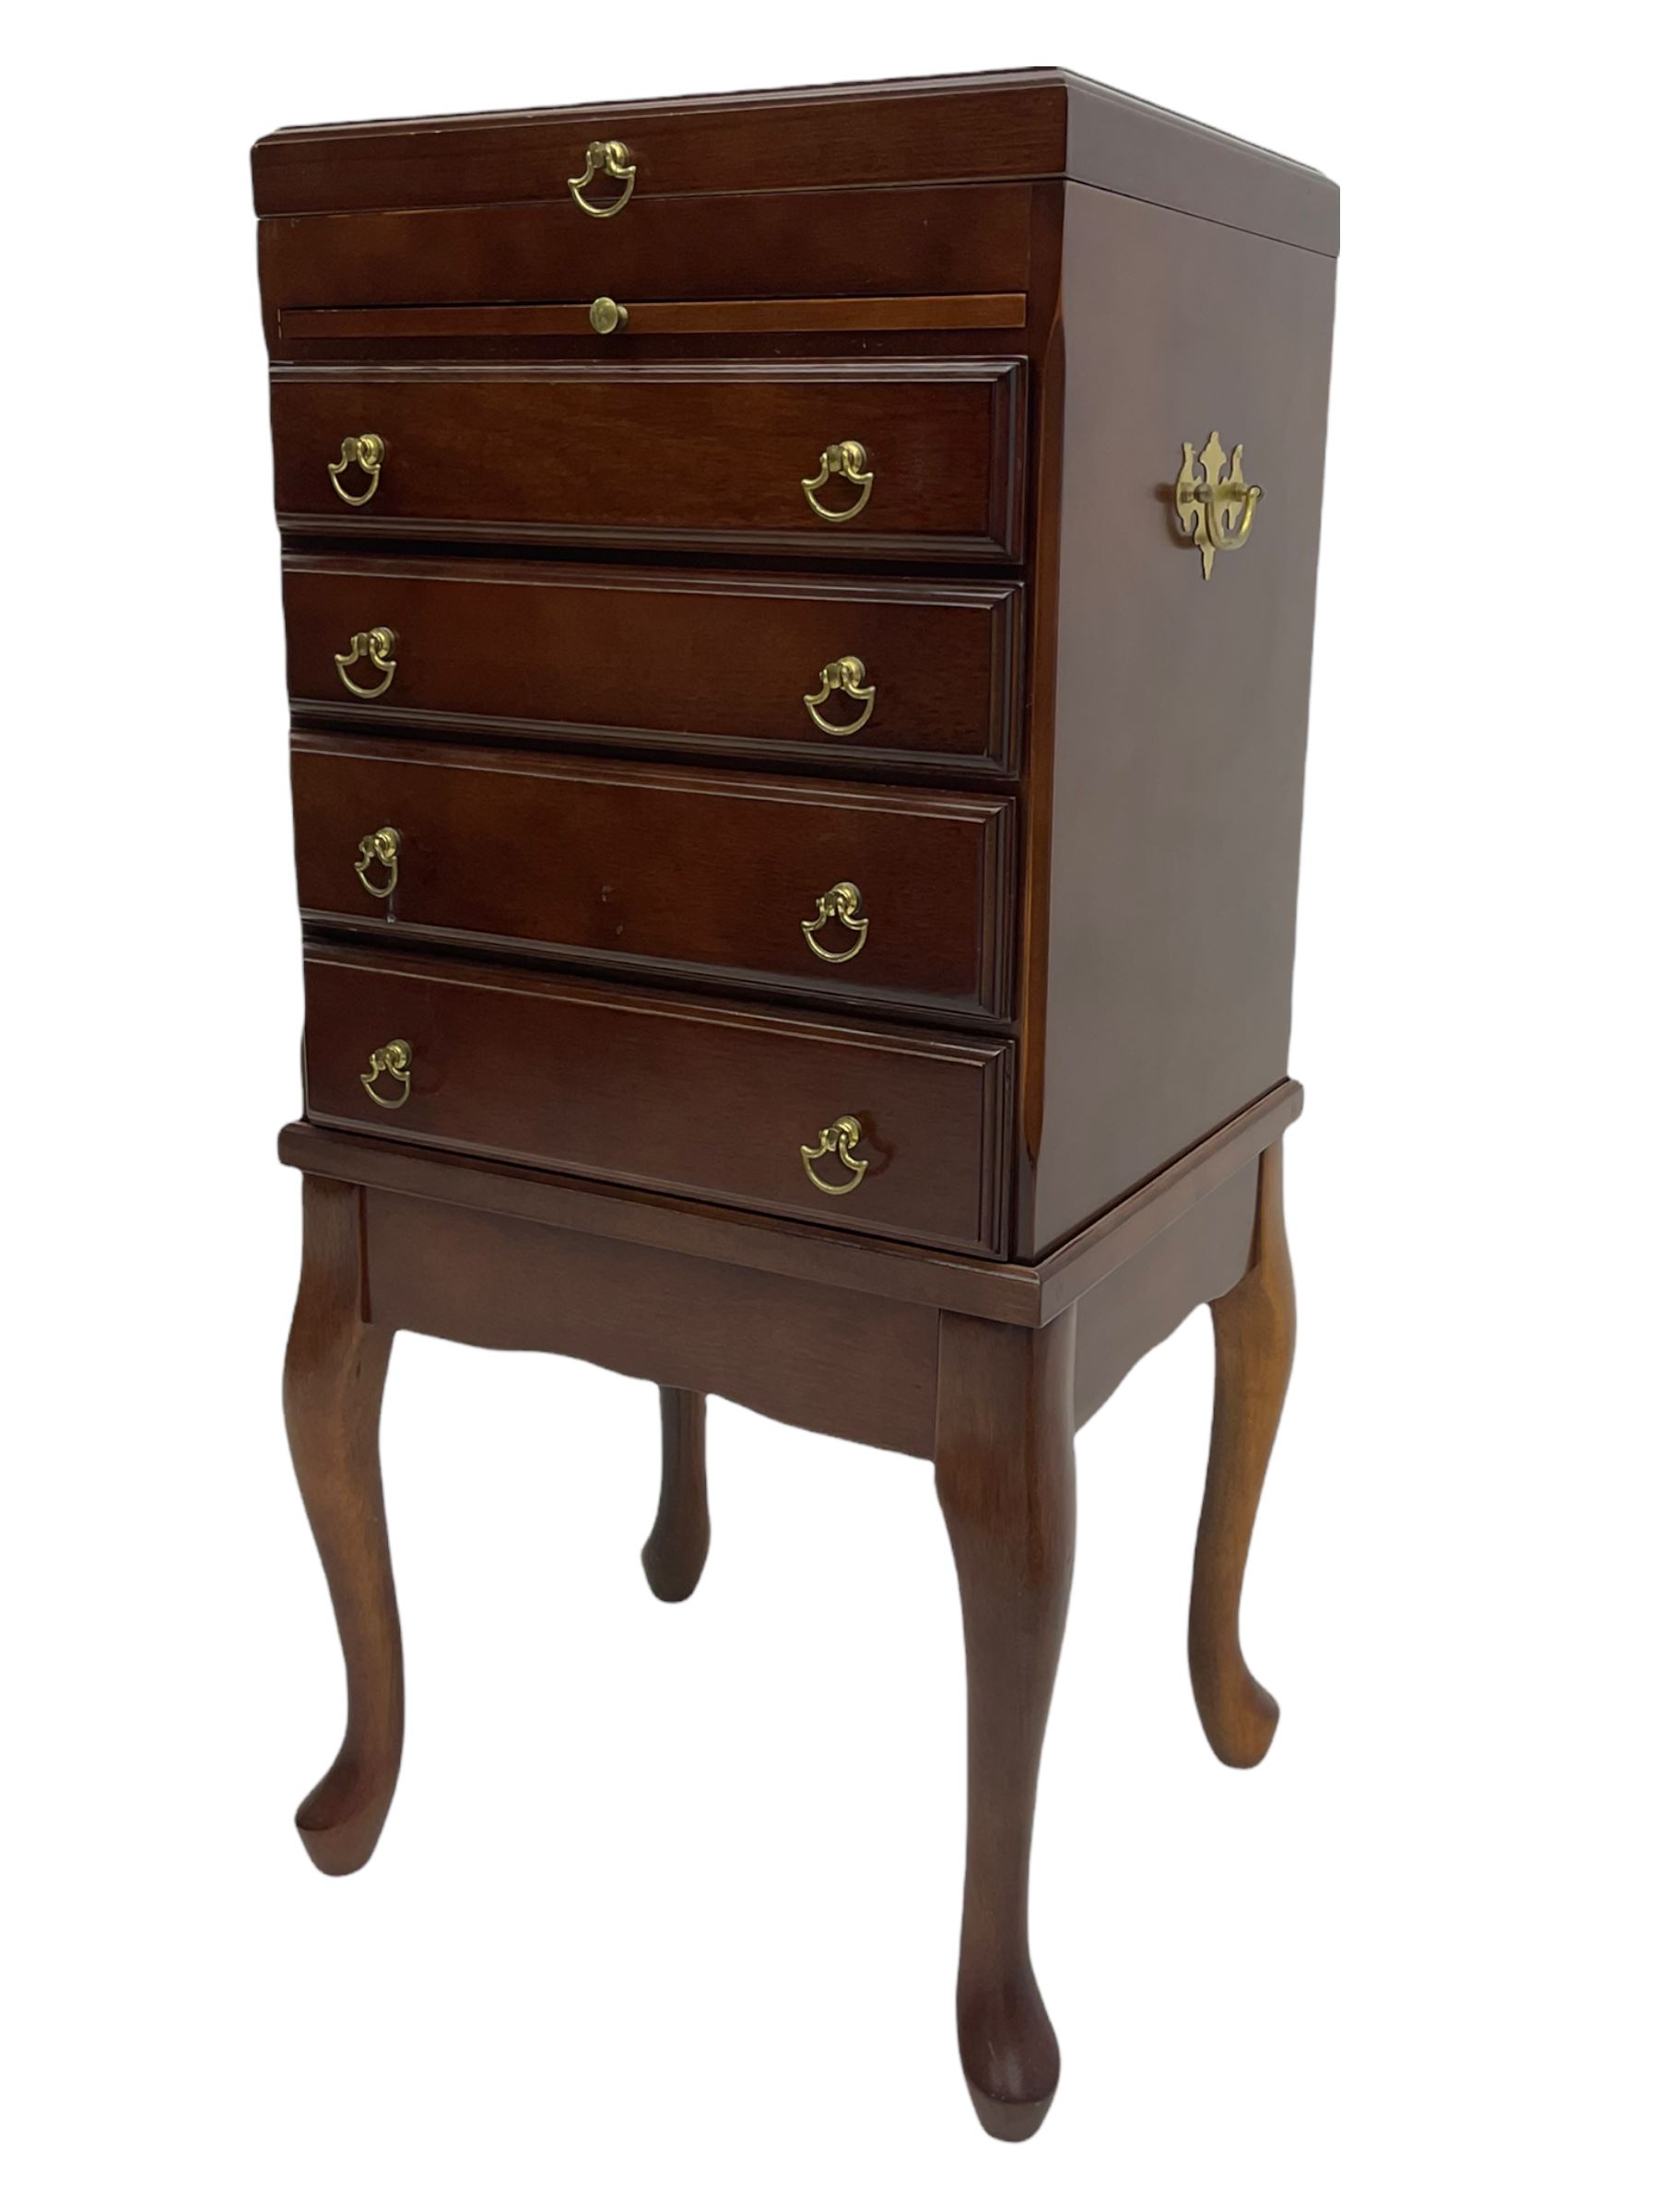 Mahogany pedestal chest on stand - Image 3 of 6